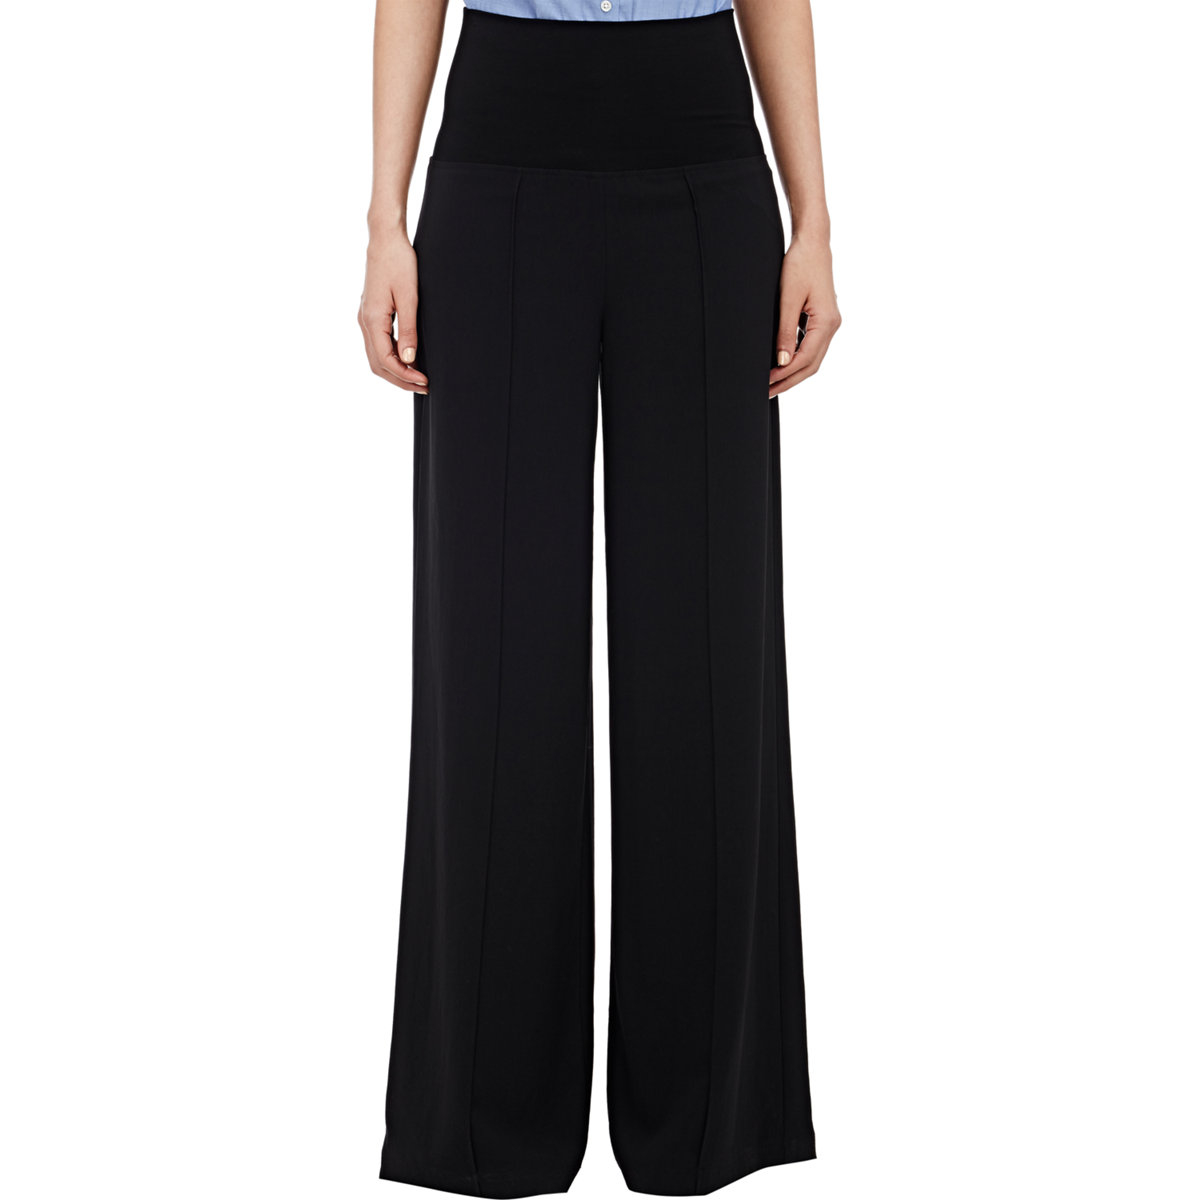 Atm Crepe Twill Palazzo Pants in Black | Lyst